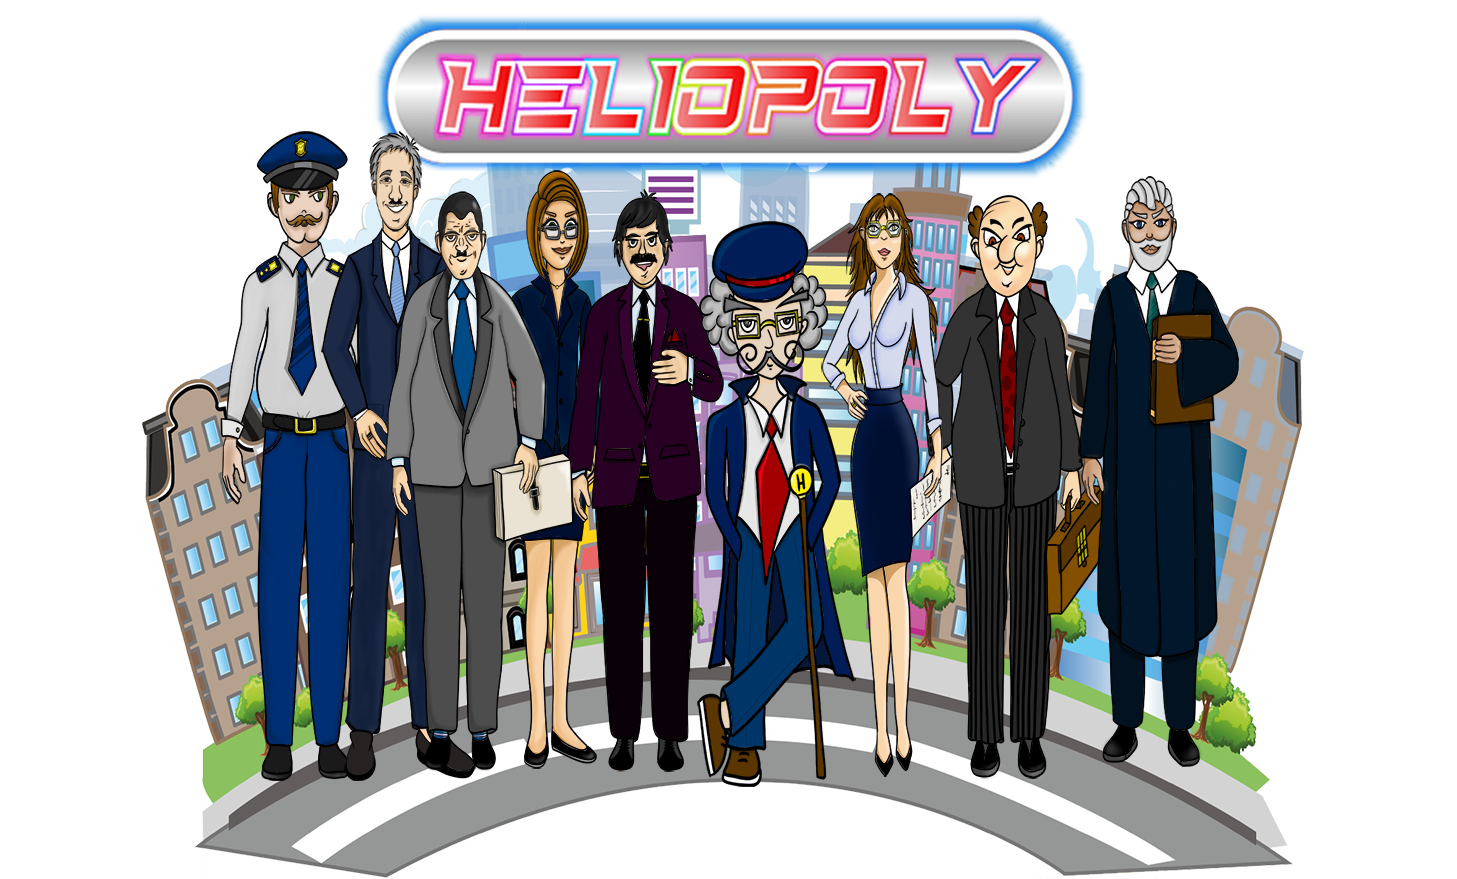 Poster of life in Heliopoly